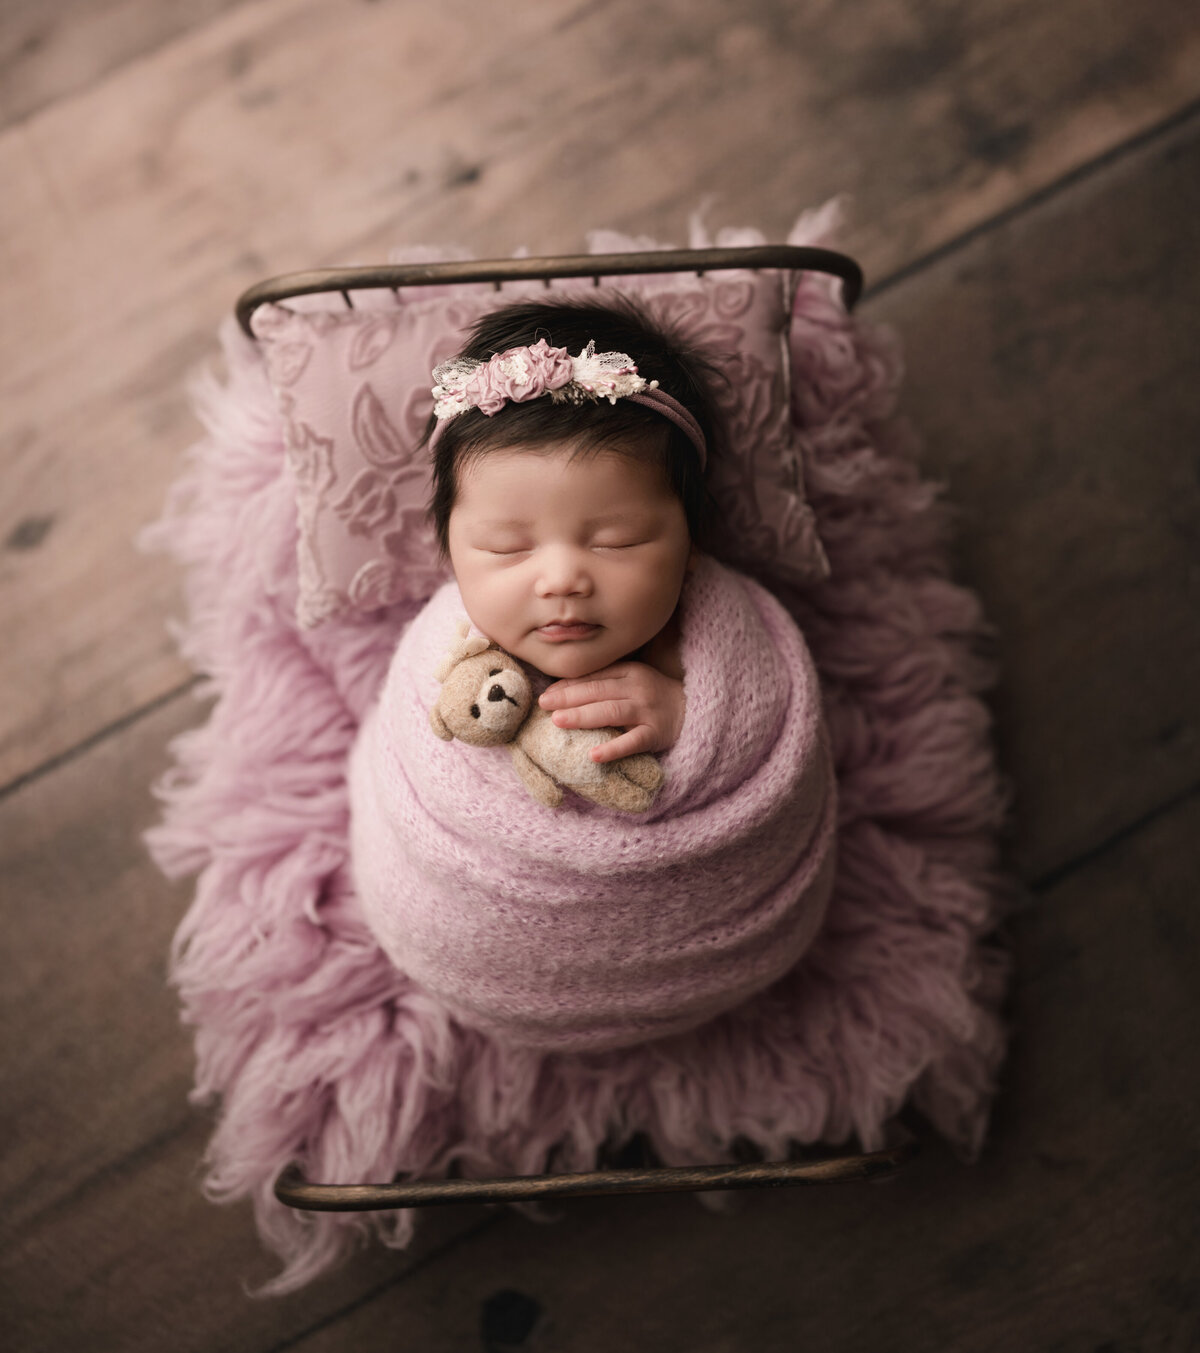 Baby girl is wrapped in a pink knit swaddle and placed atop of a miniature newborn prop bed for her Riverside, CA newborn photoshoot. Baby is sleeping an her hand is peeking out of the swaddle and holding a miniature felt teddy bear. Captured by best Riverside newborn photographer Bonny Lynn Photography.